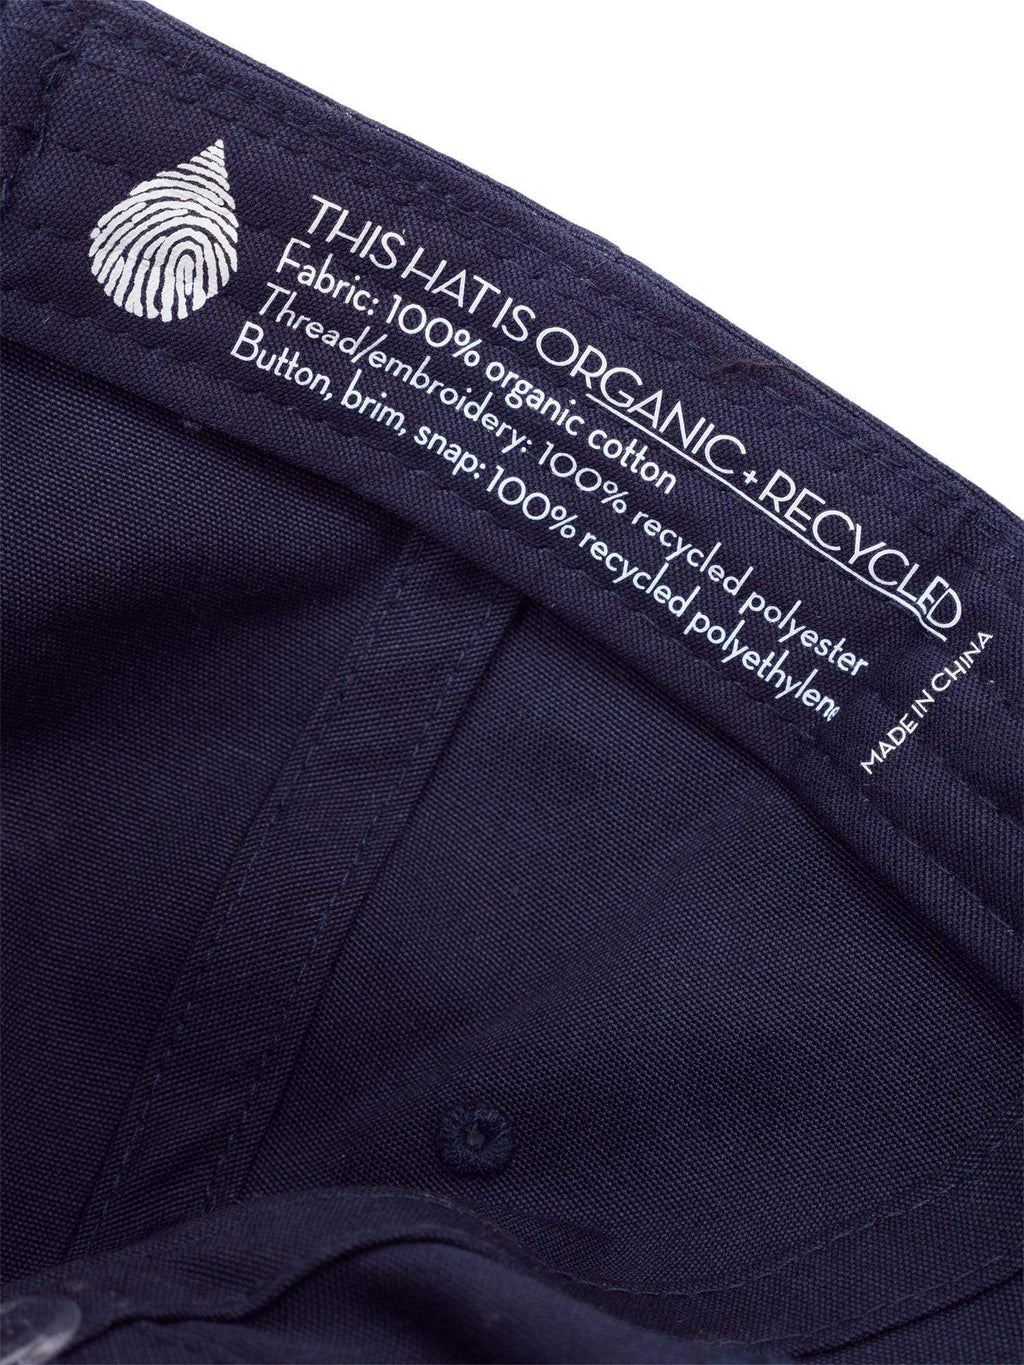 Close up image of the interior label of a blue organic cotton dad cap hat